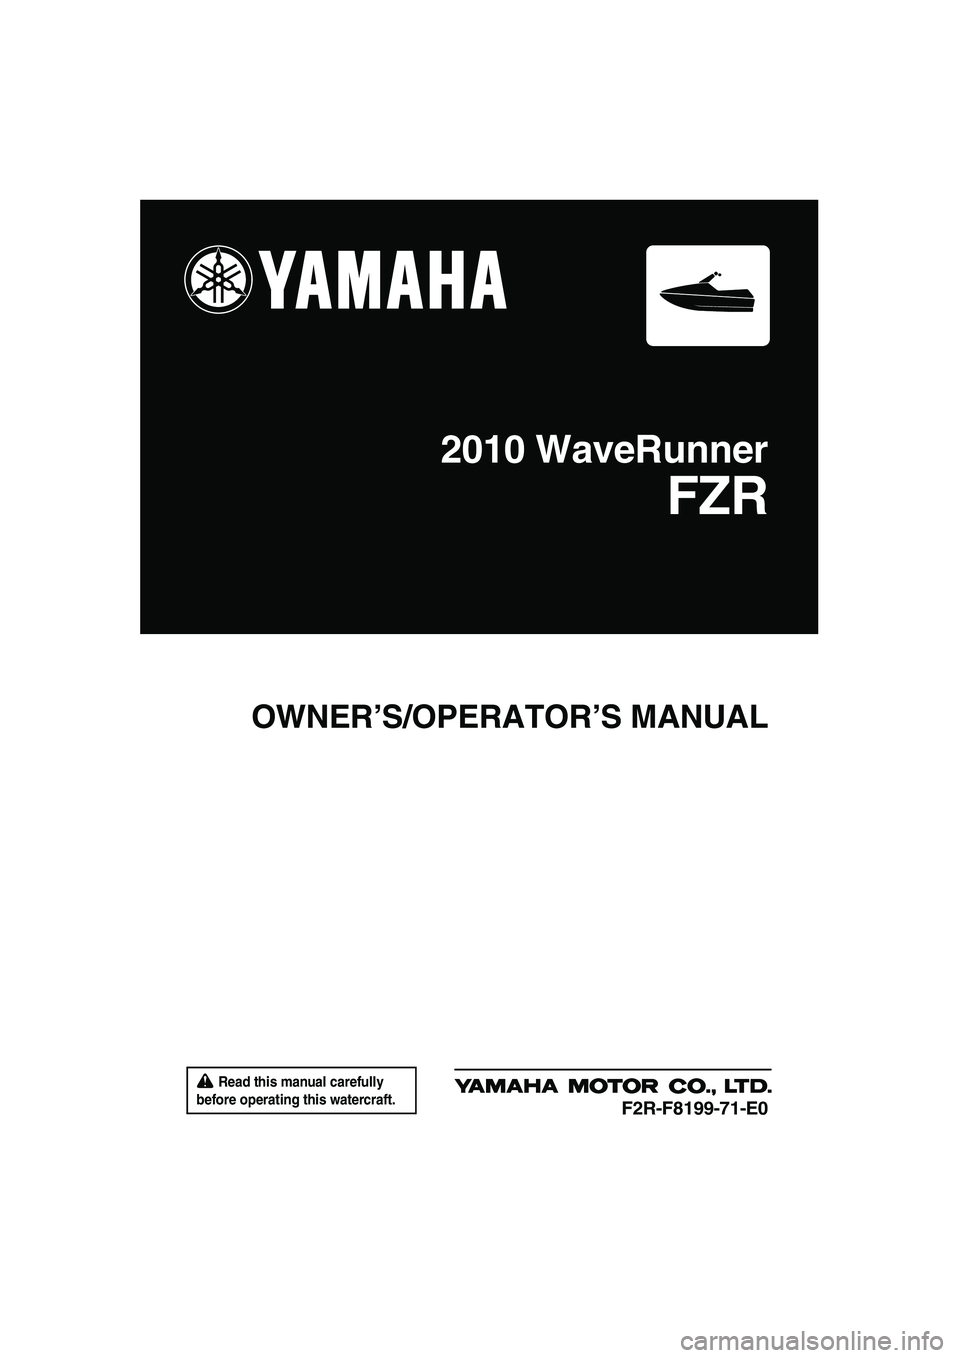 YAMAHA FZR SVHO 2010  Owners Manual  Read this manual carefully 
before operating this watercraft.
OWNER’S/OPERATOR’S MANUAL
2010 WaveRunner
FZR
F2R-F8199-71-E0
UF2R71E0.book  Page 1  Monday, July 13, 2009  11:28 AM 